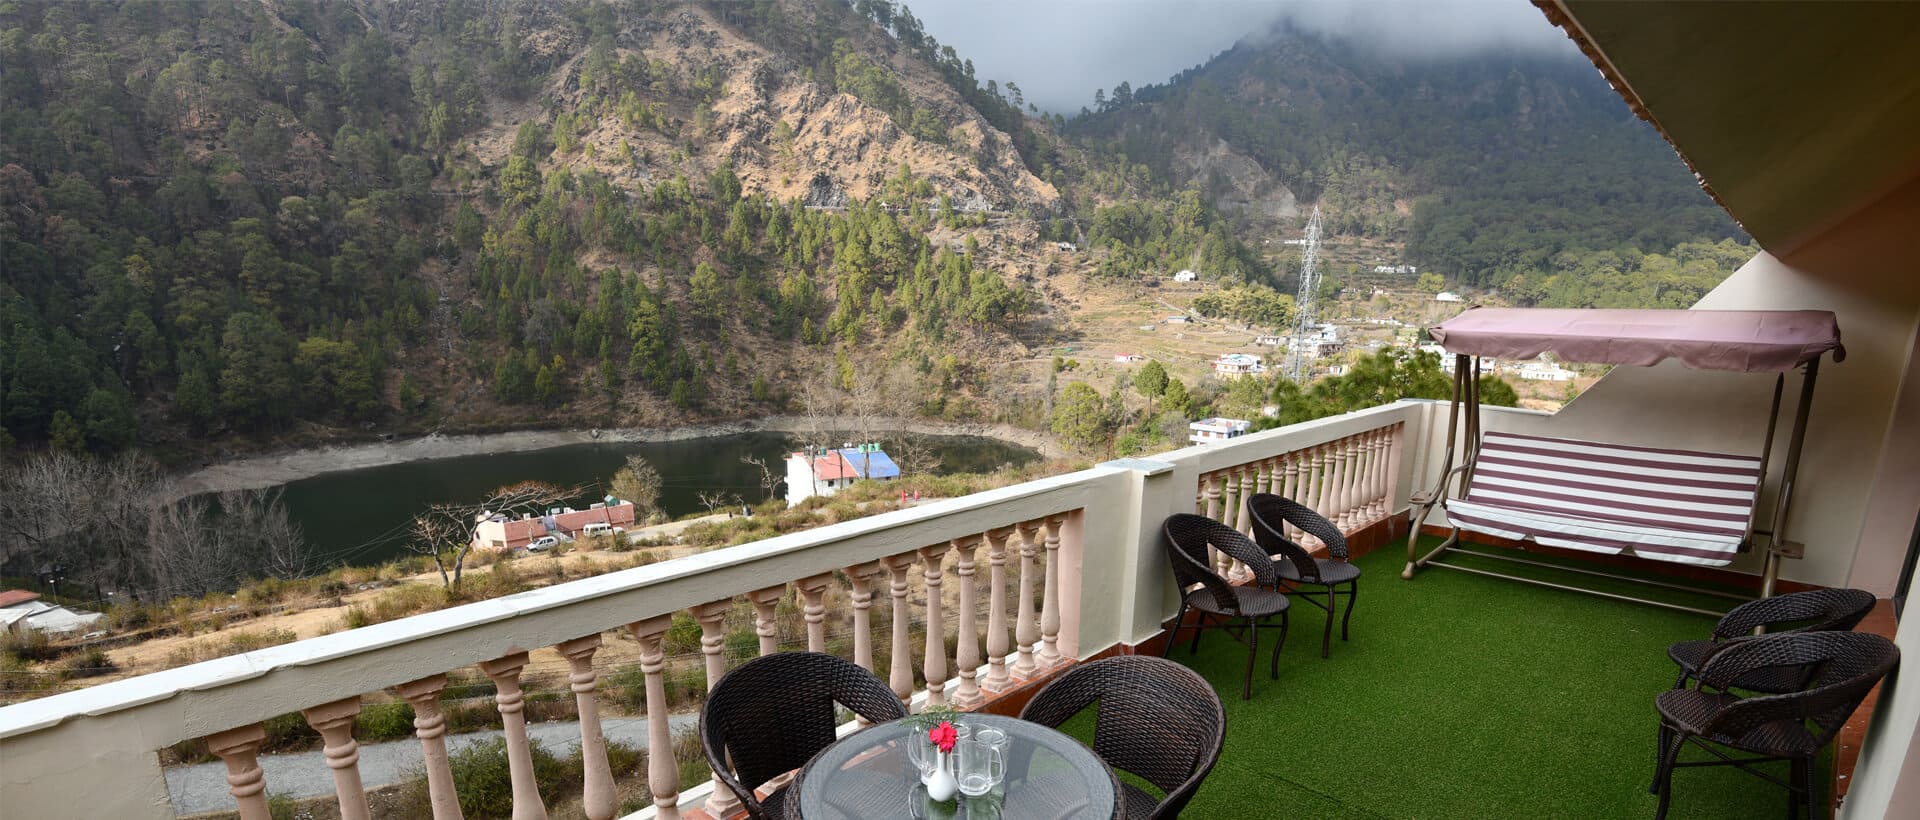 enjoy Moutains and greenery of nainital from dynasty hotel sitting area 